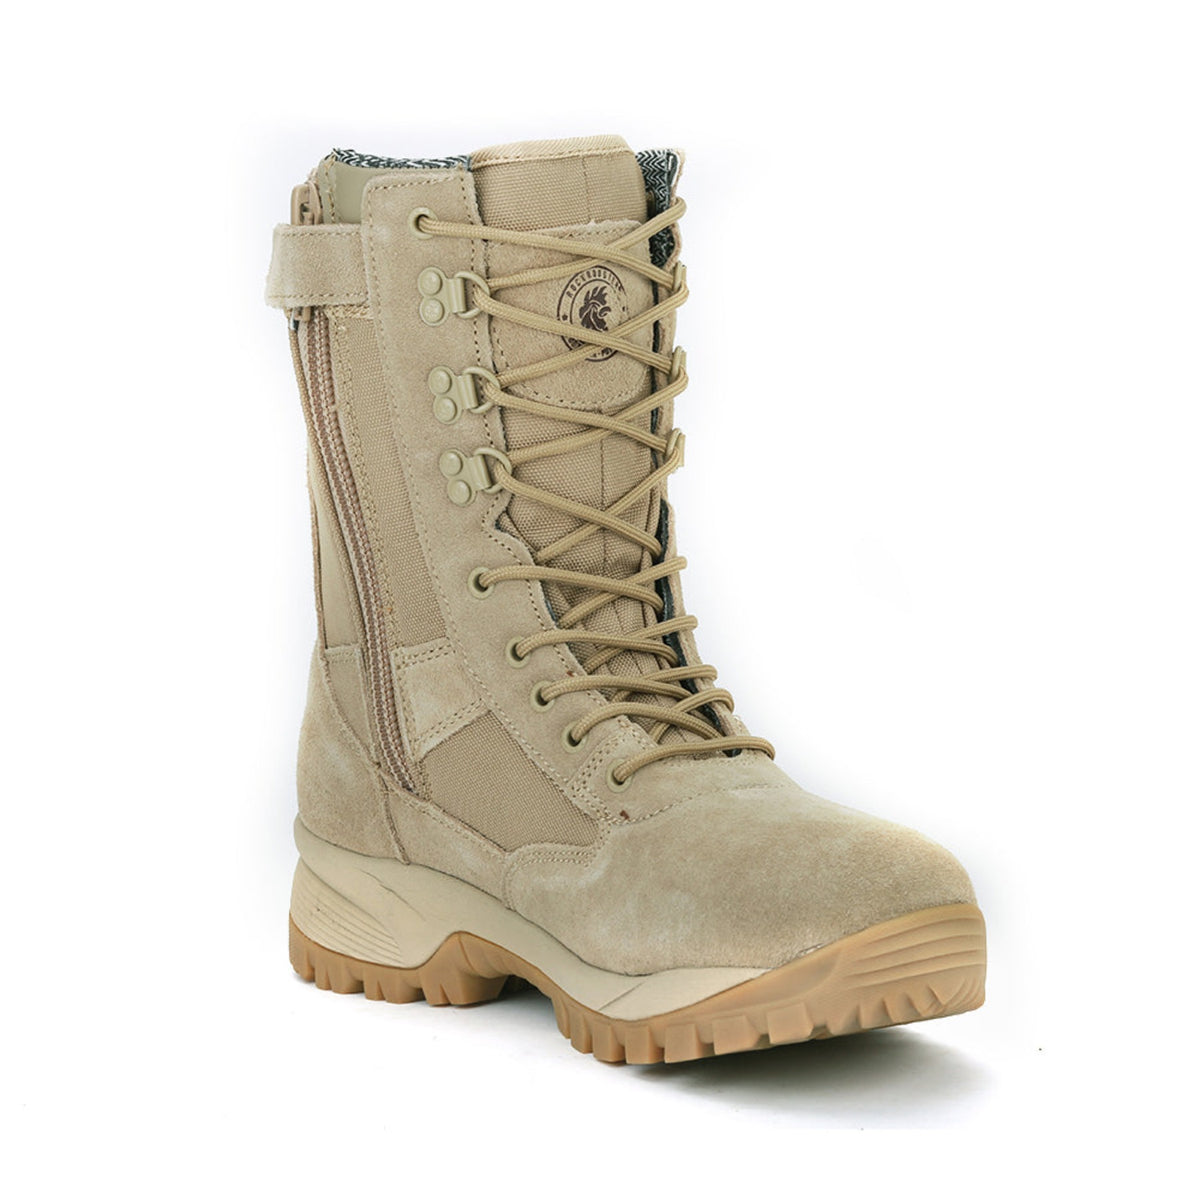 Tactical Boots, Tactical Gear Superstore